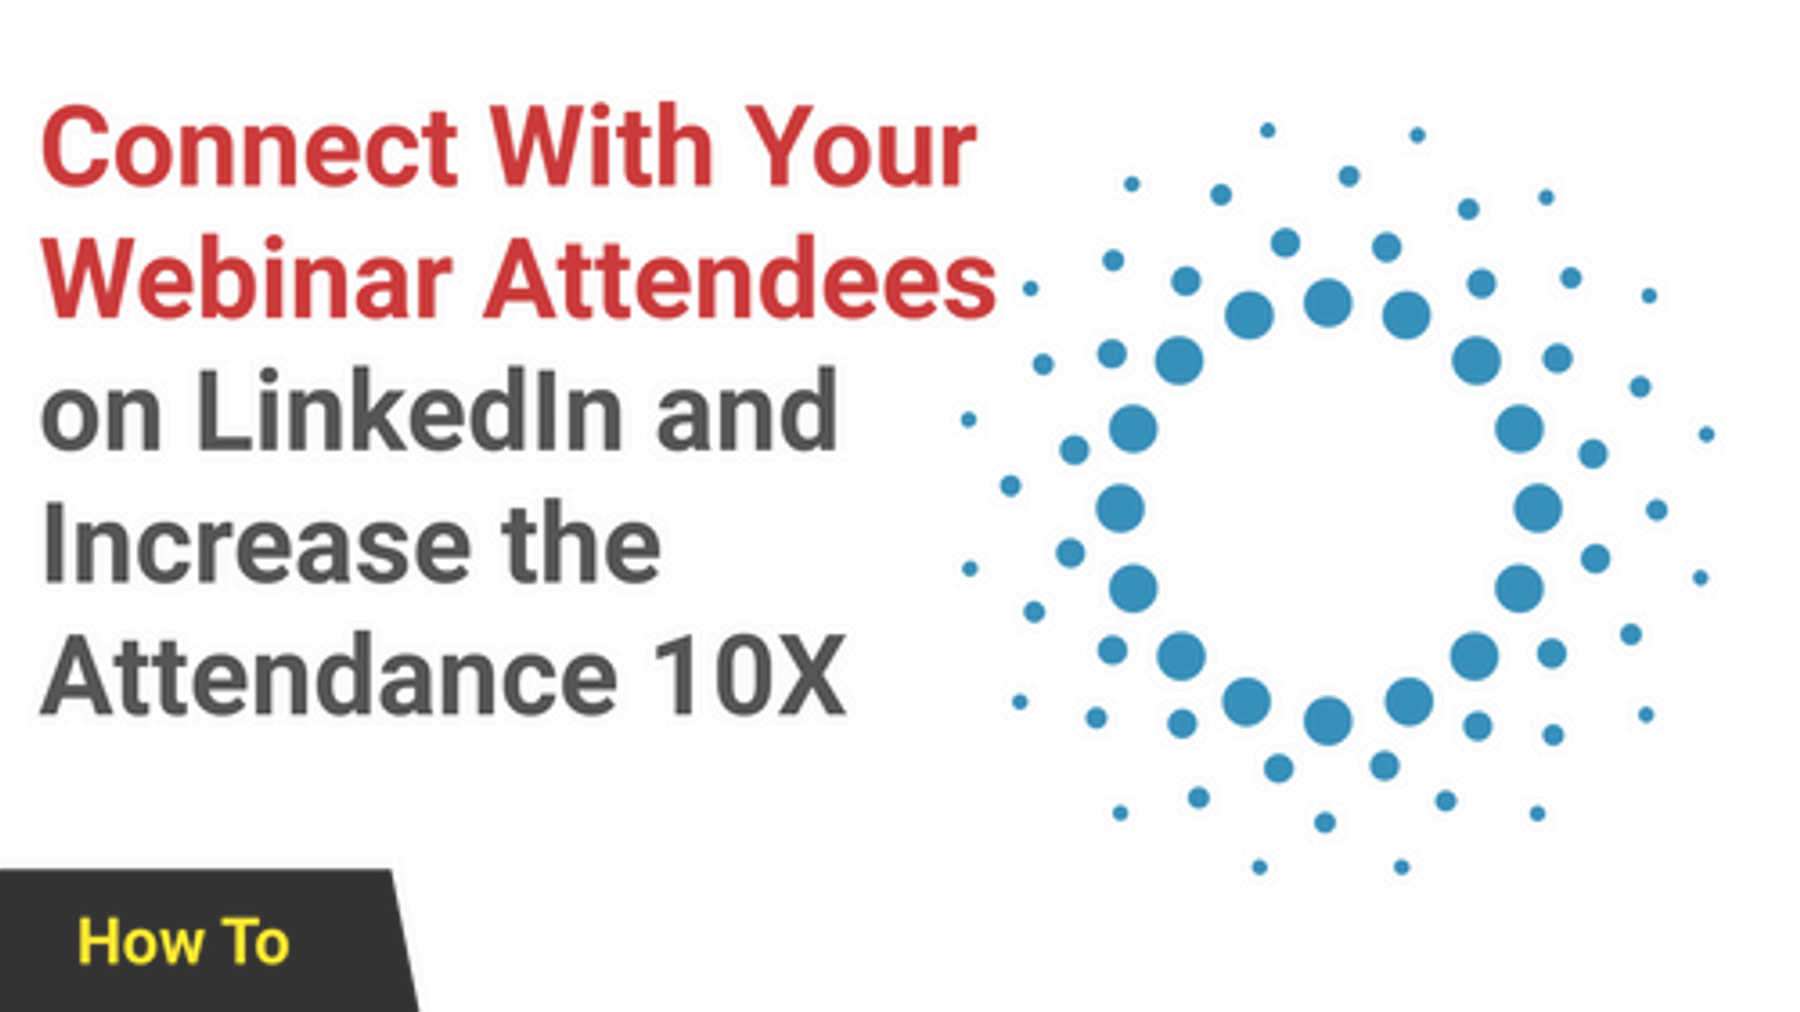 Connect With Your Webinar Attendees on LinkedIn and Increase the Attendance 10X